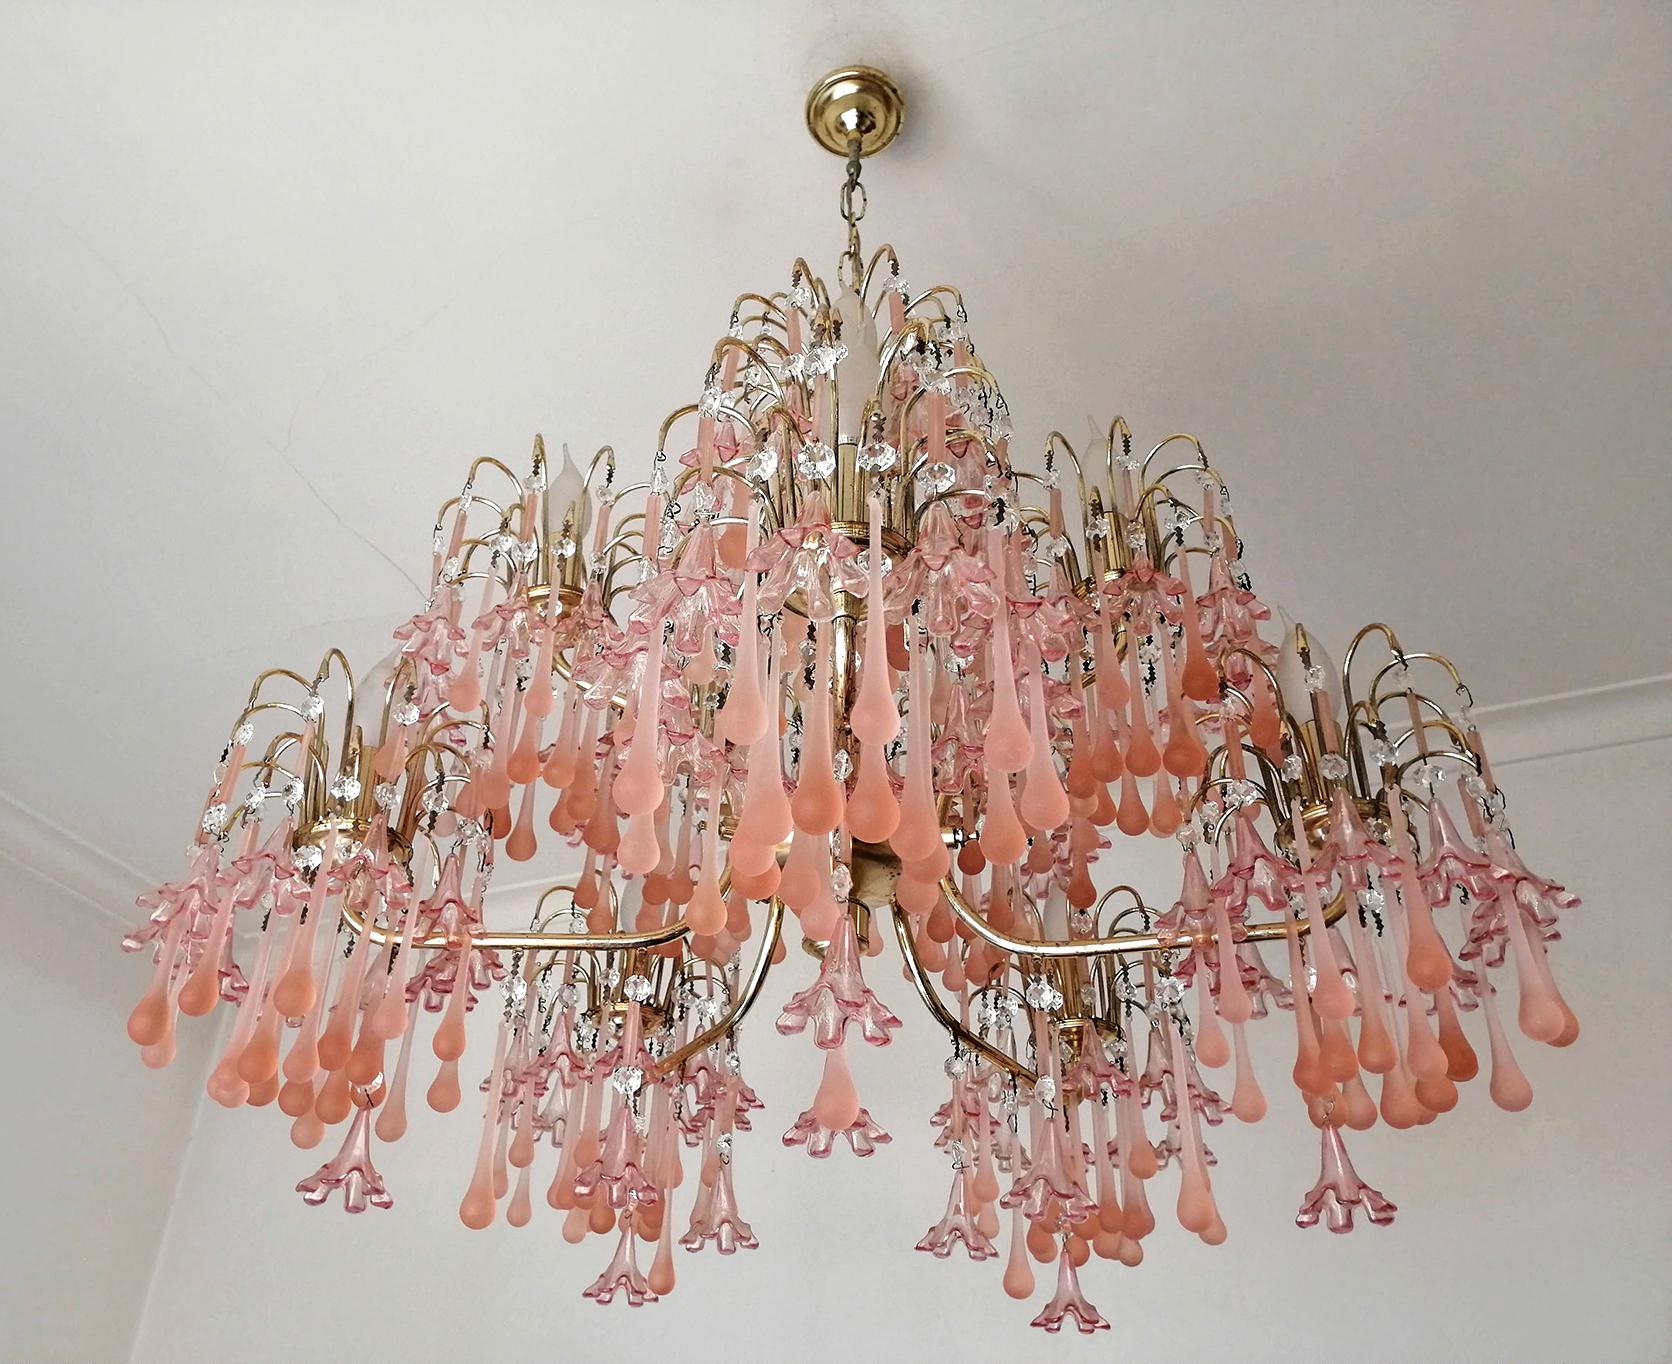 Amazing midcentury Italian Murano chandelier in the style of Venini.
Pink fogged crystal teardrops, pink glass flowers waterfall and gilt brass 31 tiers wedding cake chandelier.
Measures:
Diameter 29.92 in/ 76 cm
Height 35.43 in / 90 cm
10